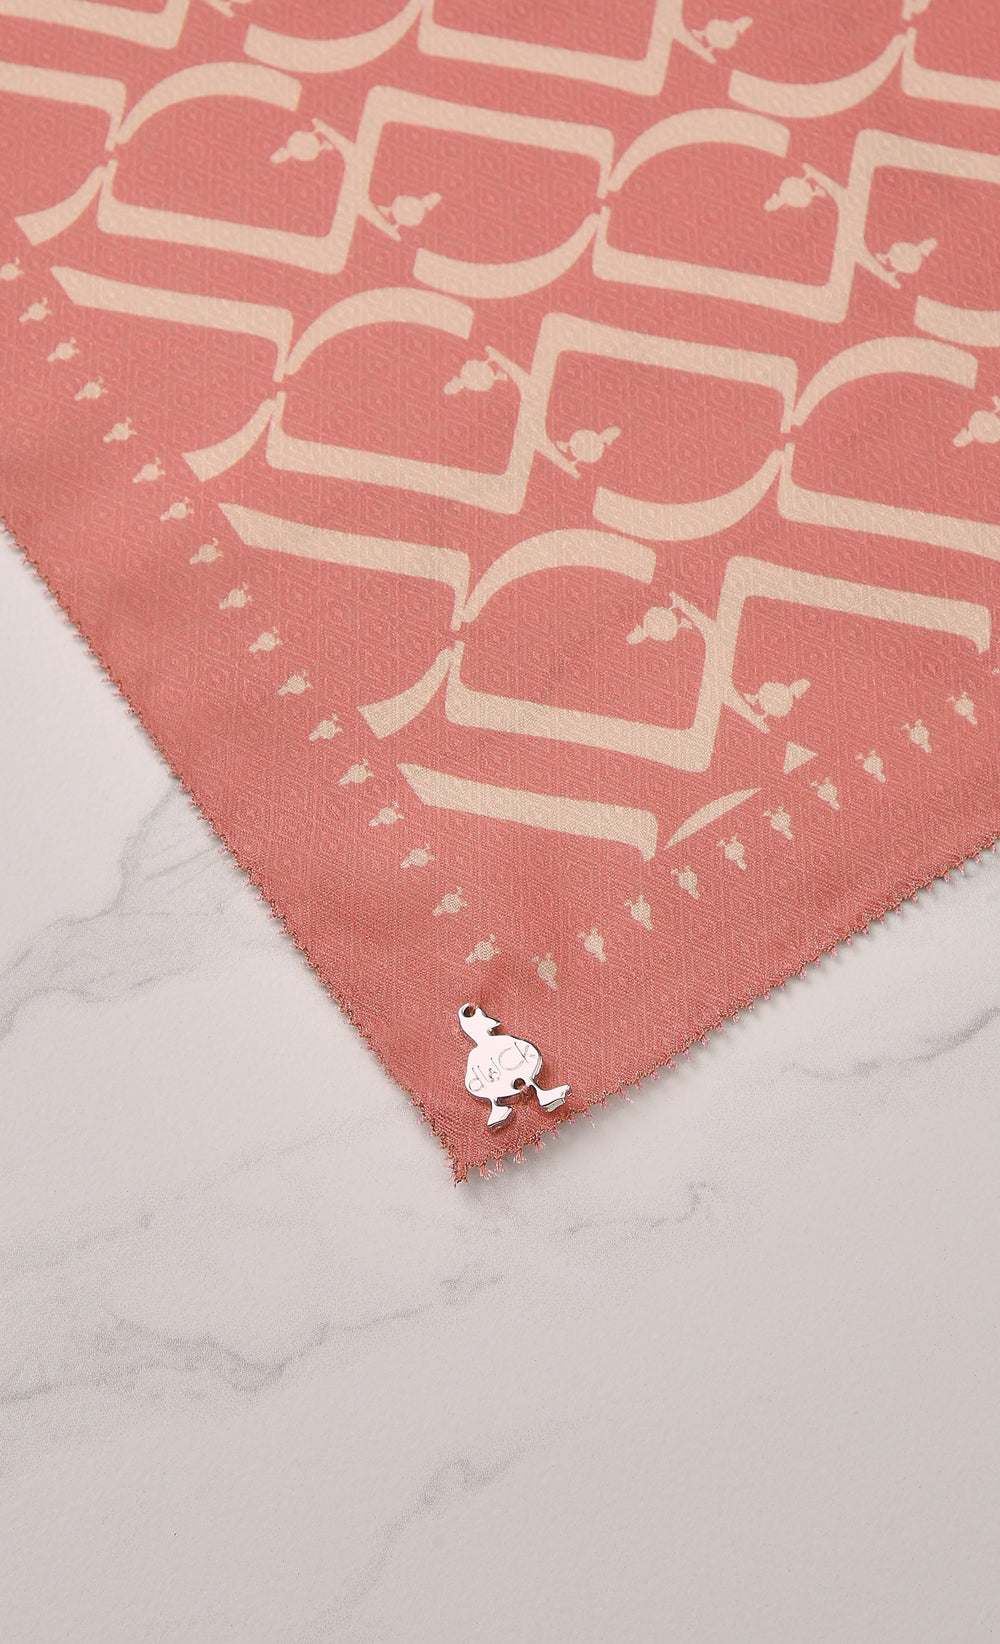 D Monogram dUCk Voile Shawl in Creamsicle